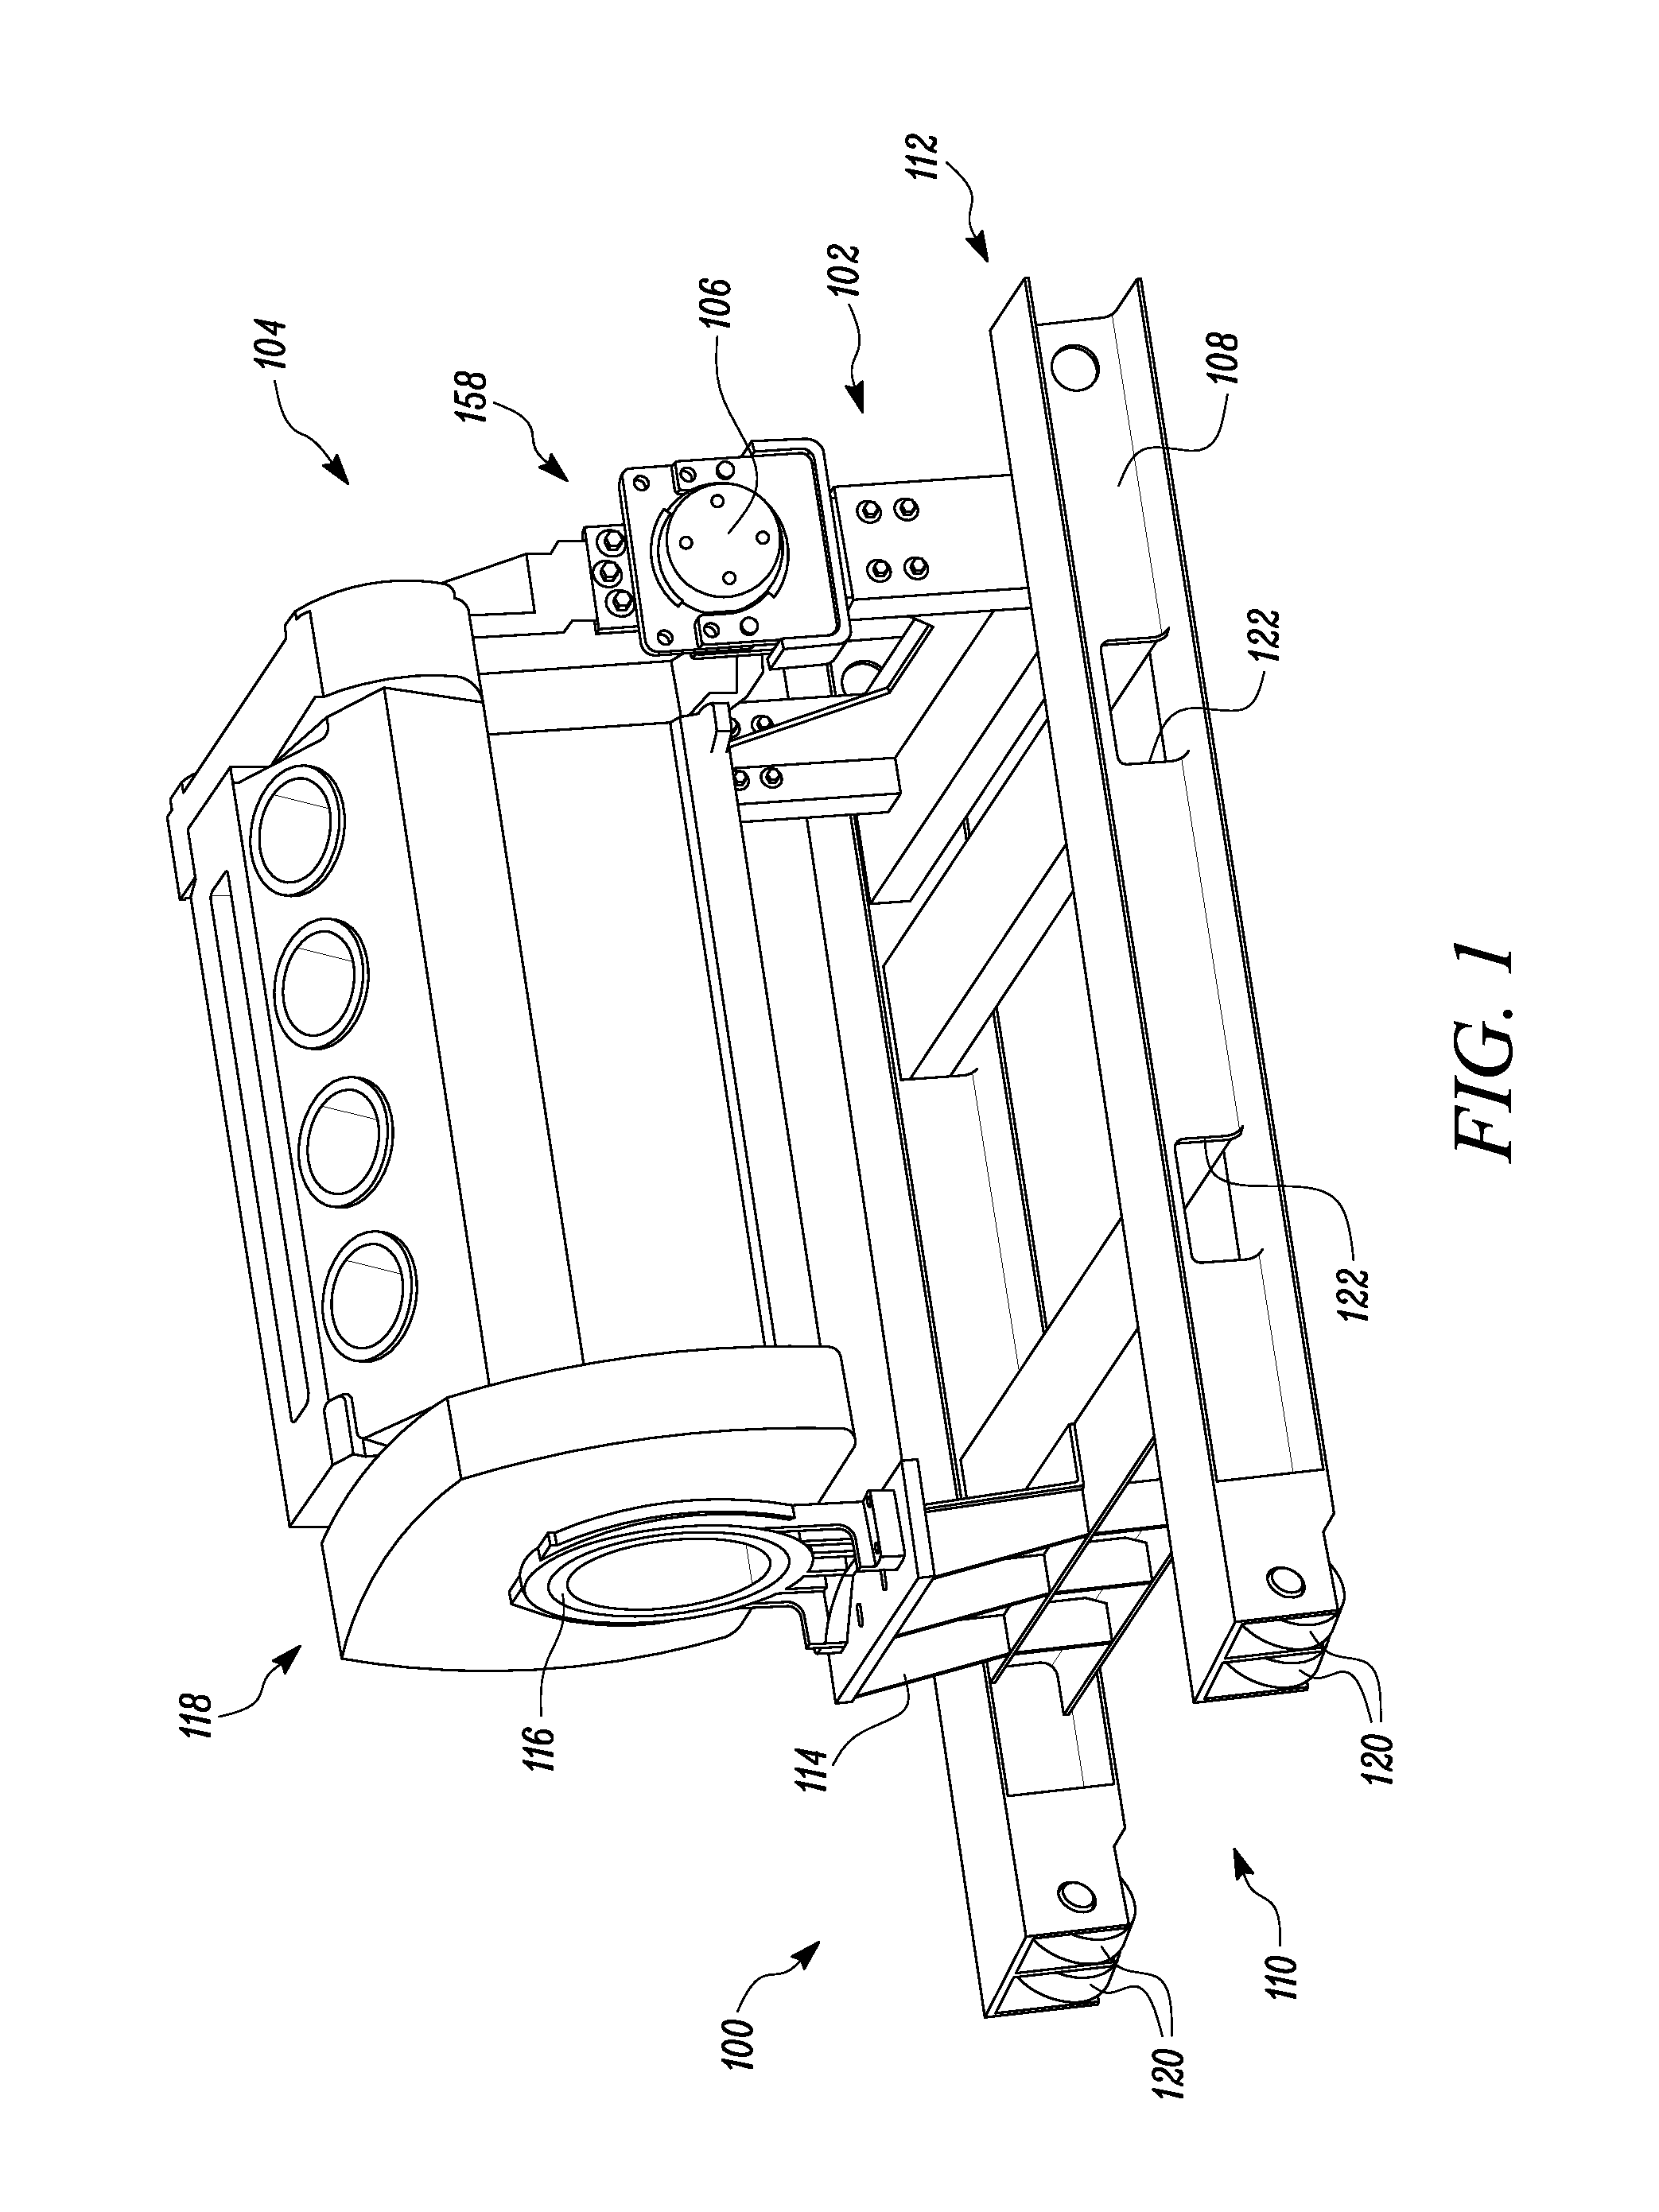 Engine stand with rear mount support